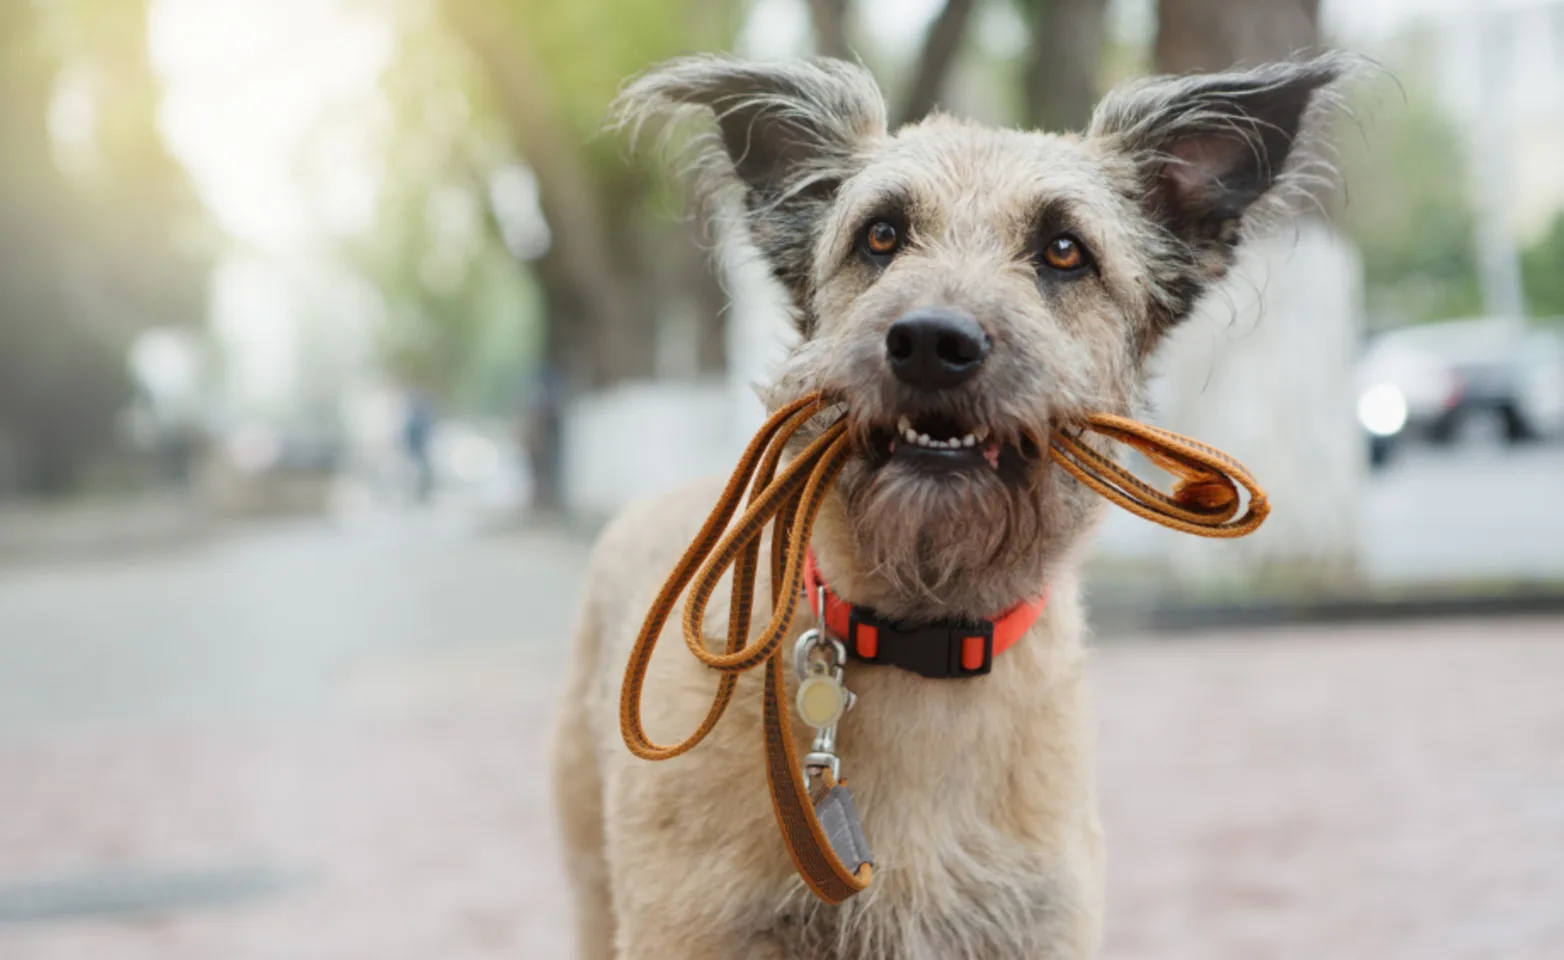 A Gray/Brown Dog Biting its Leash Standing Outside